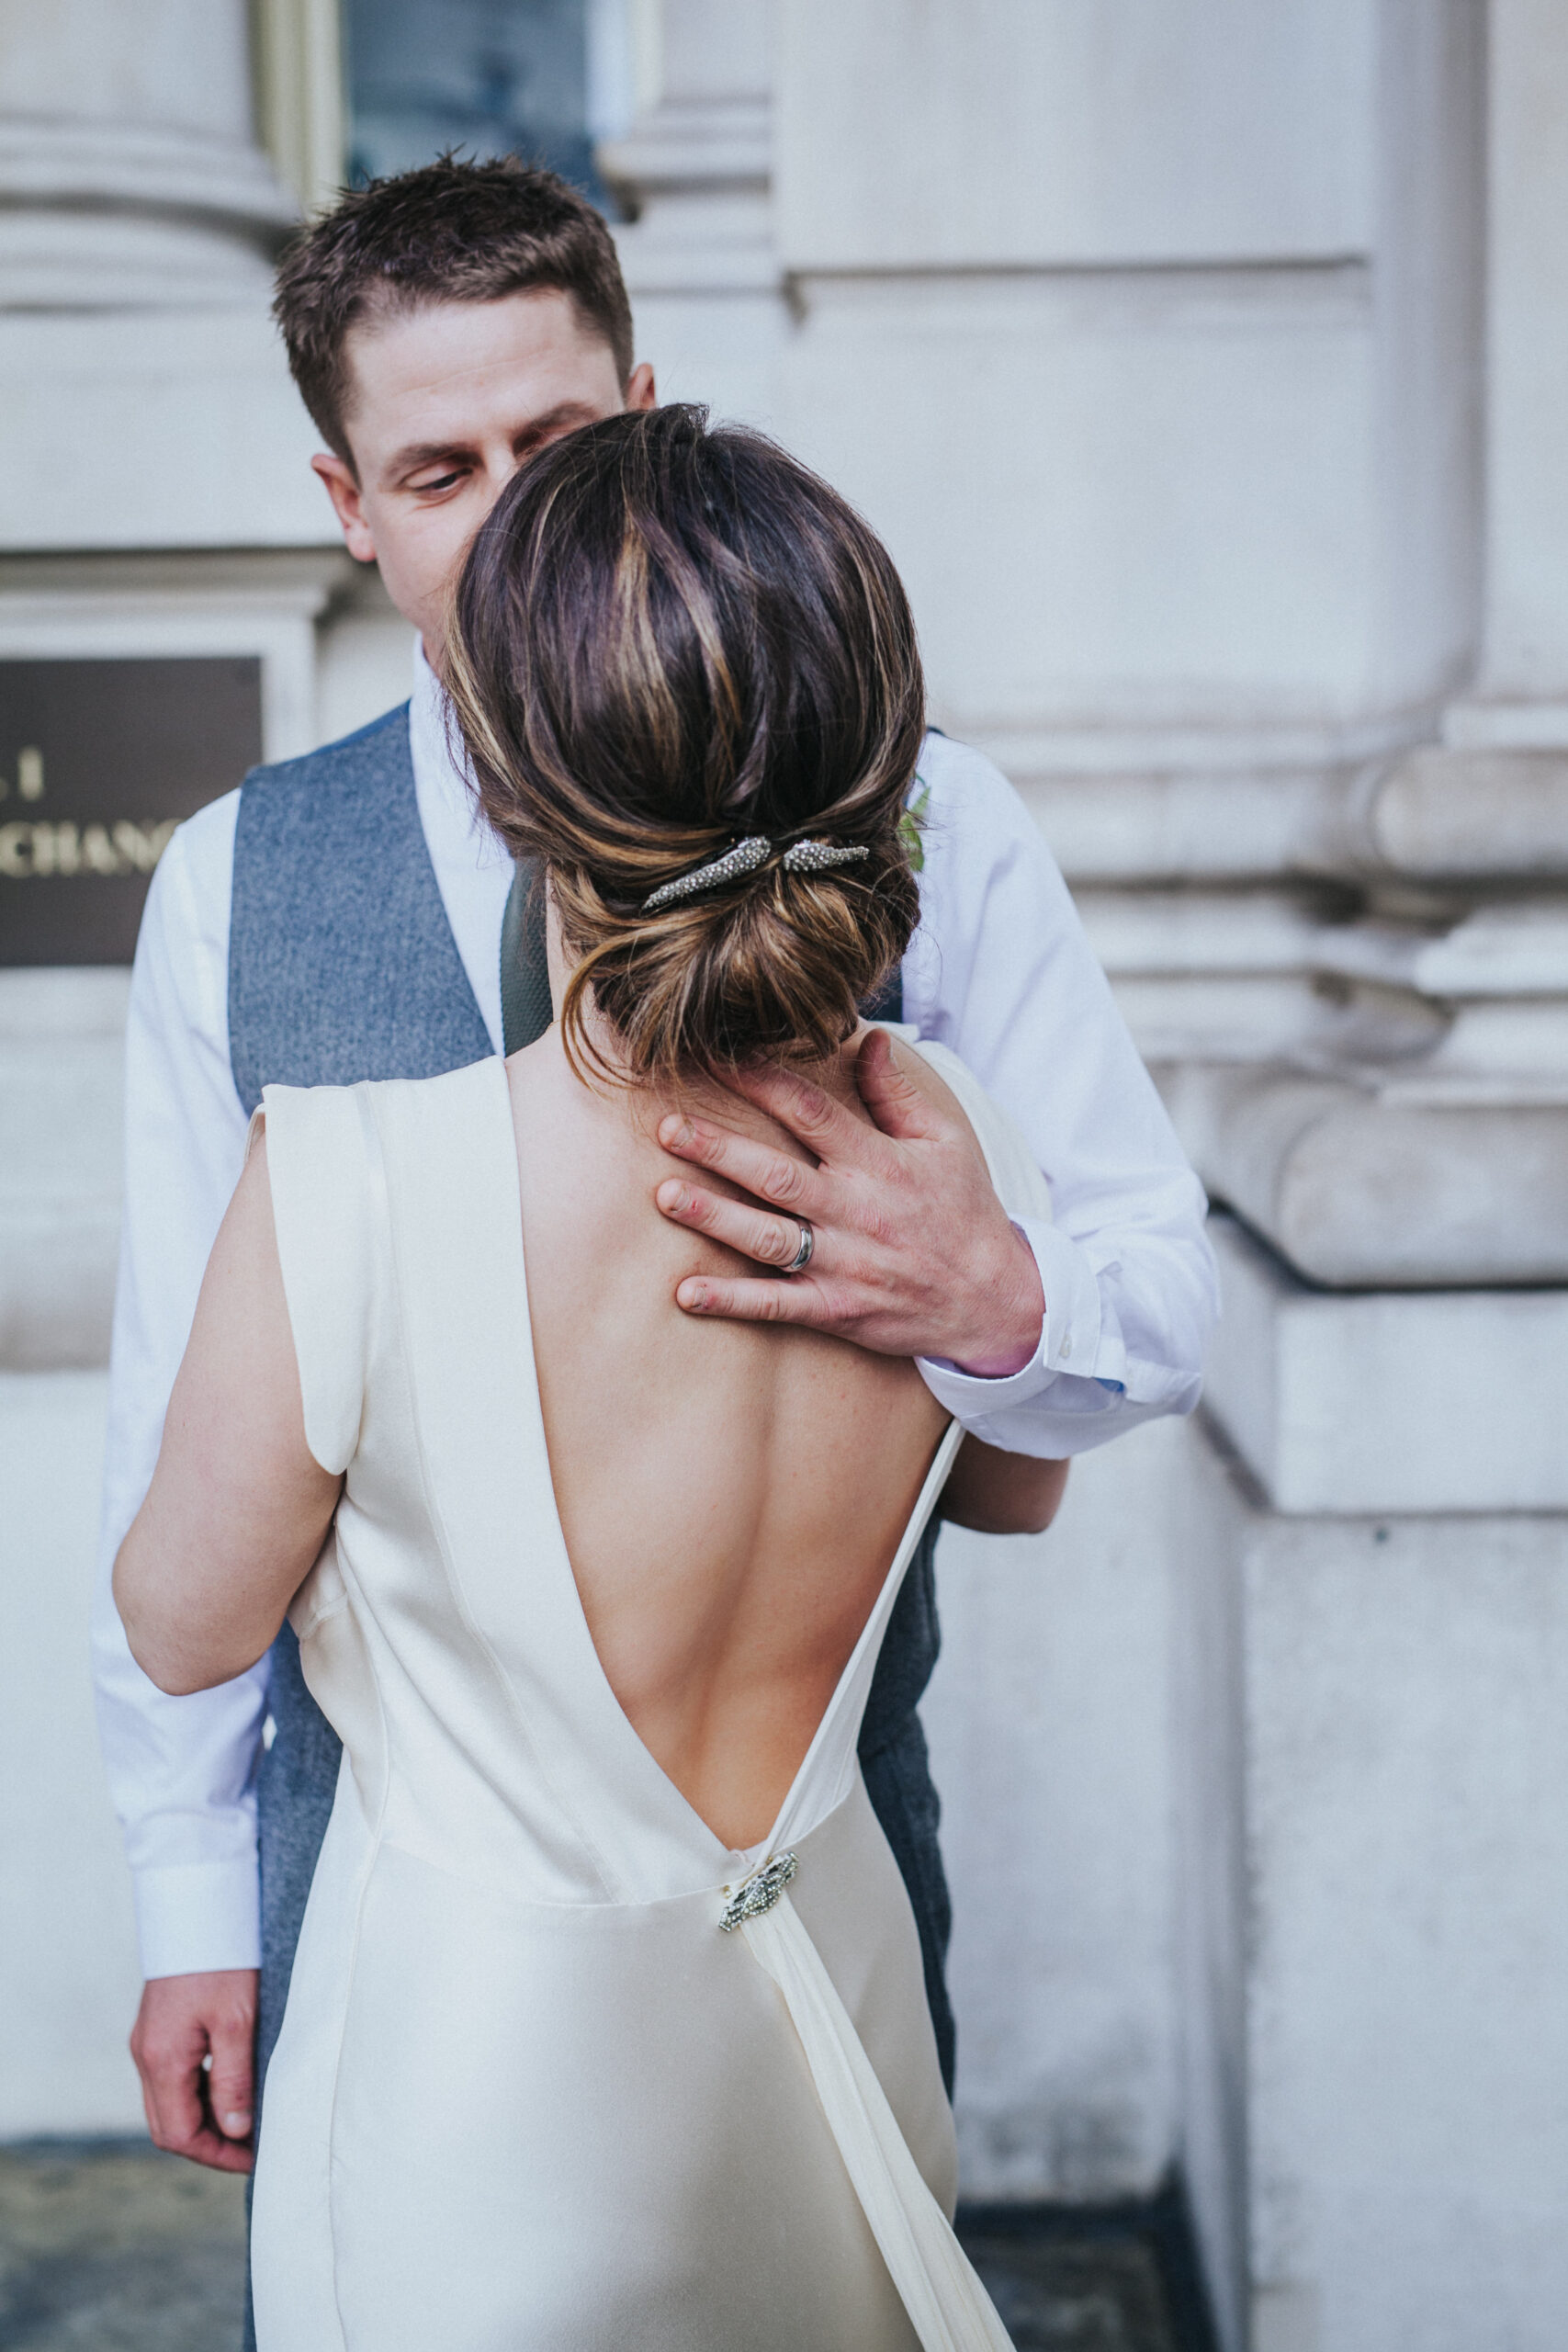 https://www.drakeandmorgan.co.uk/the-parlour/wp-content/uploads/sites/51/2022/05/ZoeEd_wedding-366-scaled.jpg